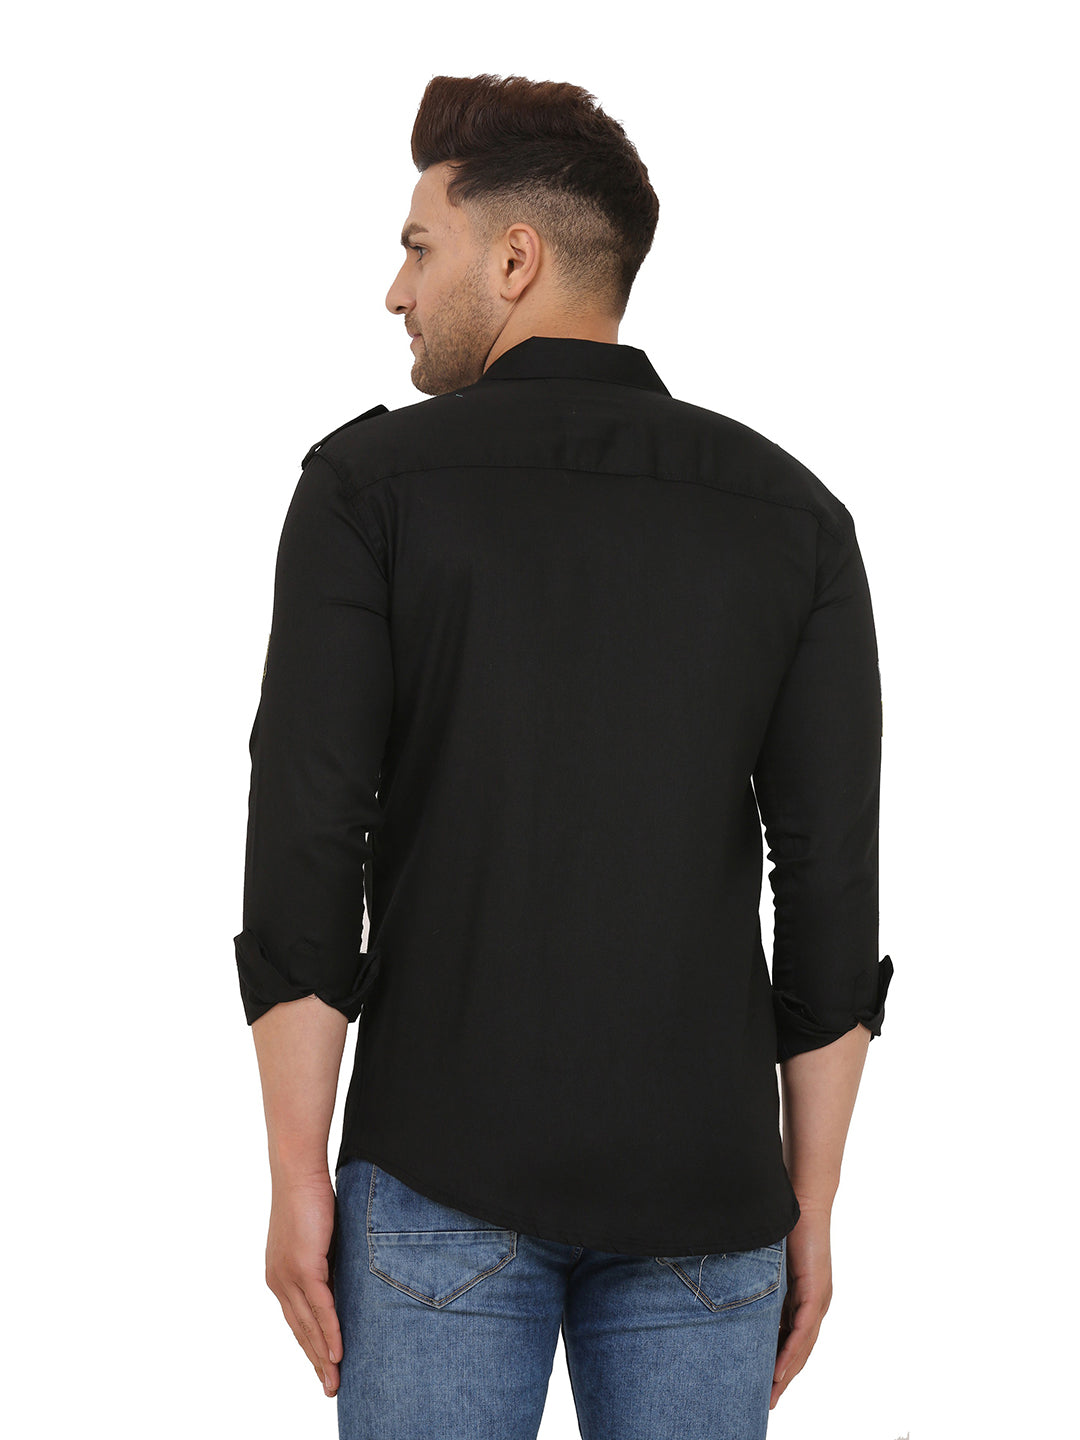 Men's Stylish Cotton Casual Shirt | Affordable and Trendy Fashion ( Black )